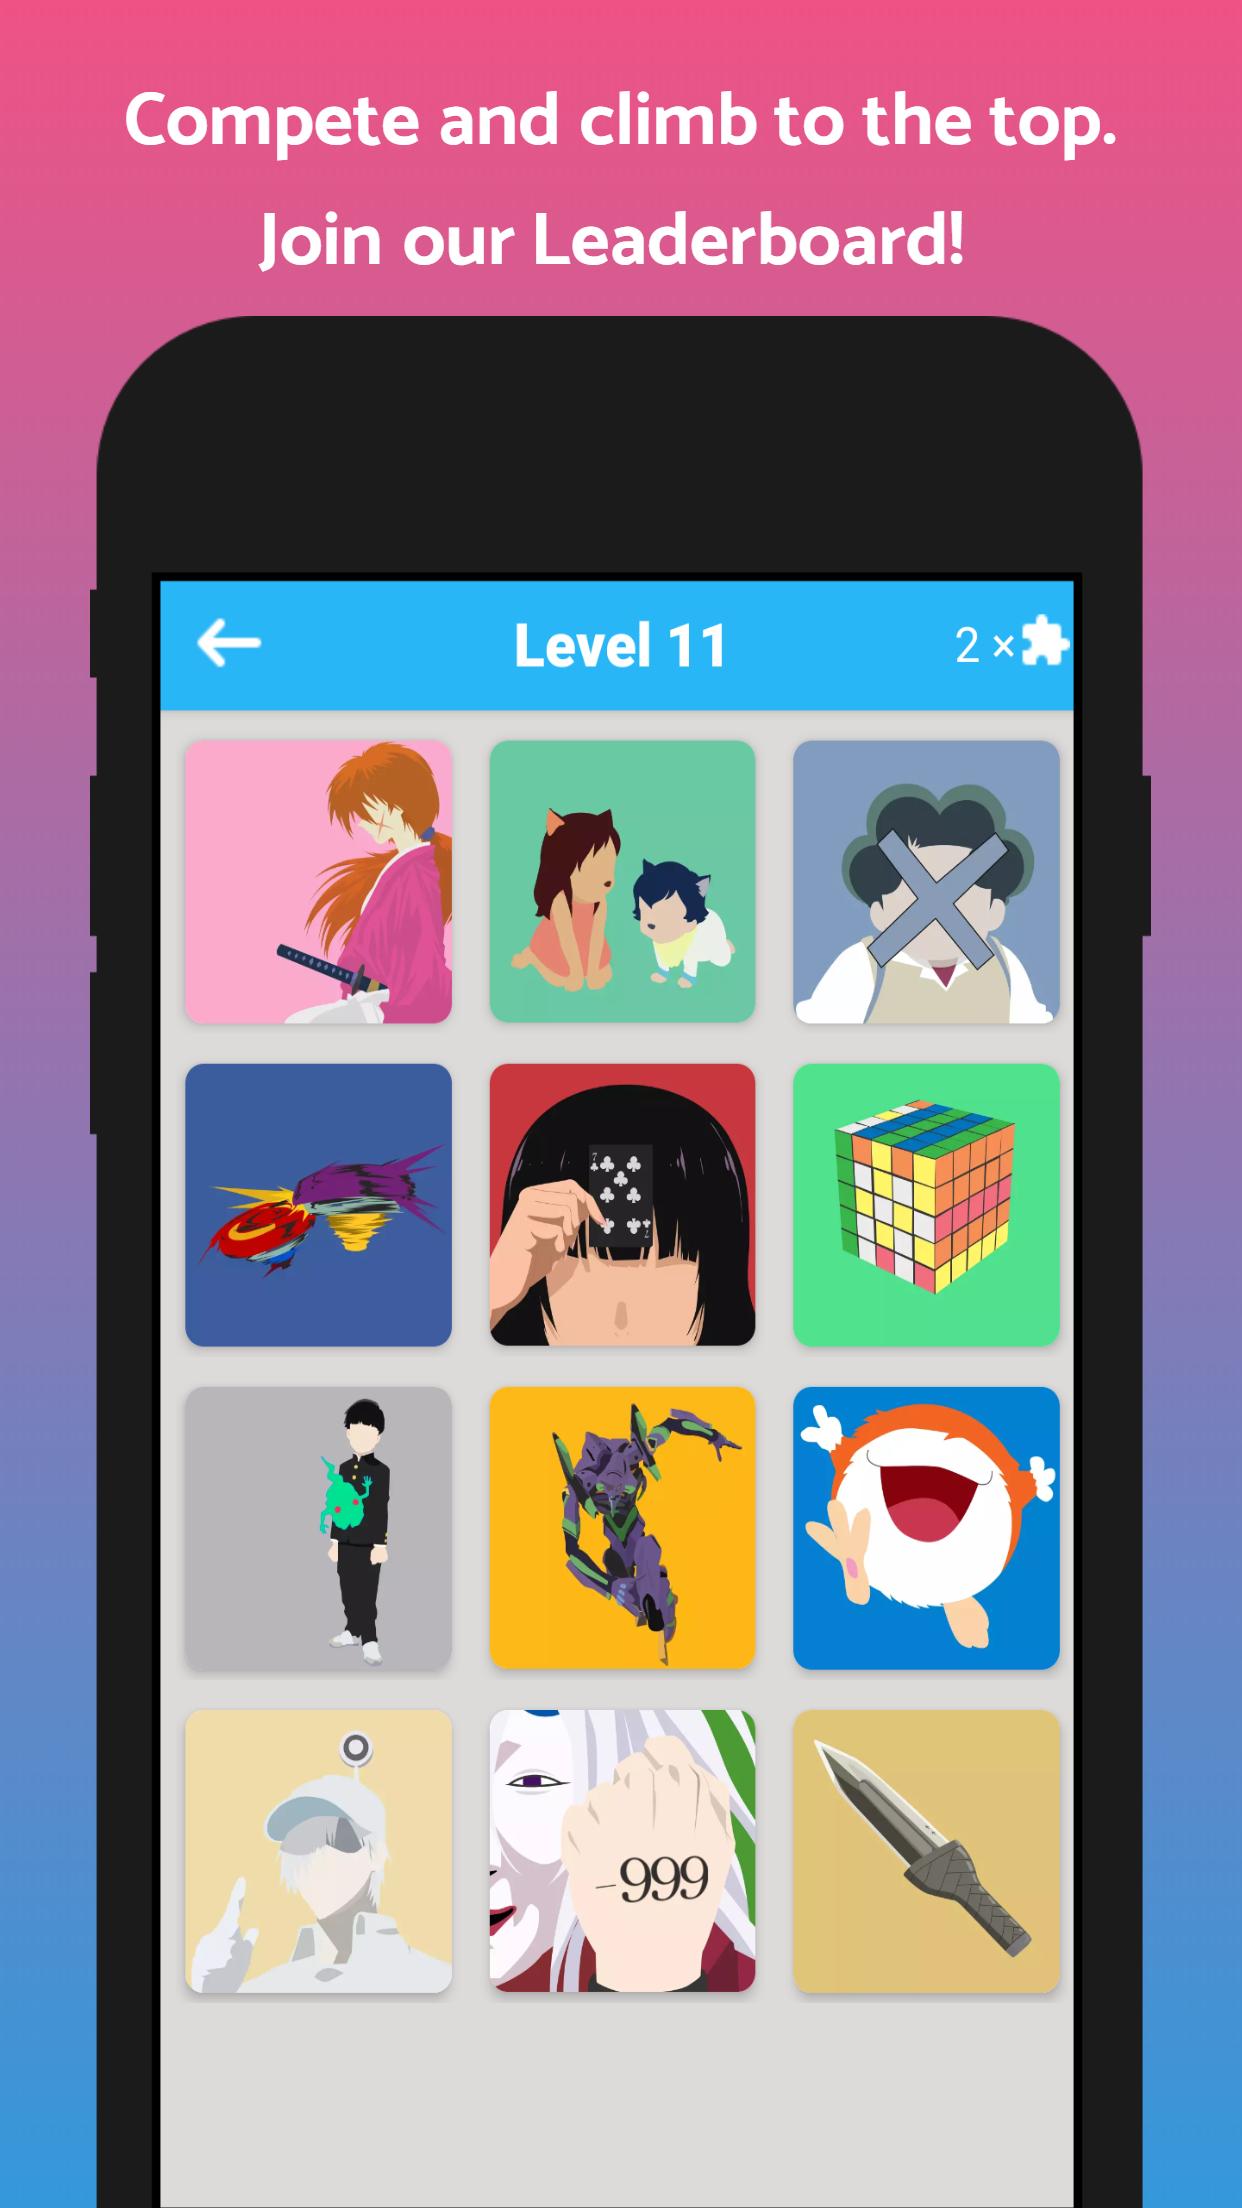 Guess the Anime Quiz for Android - APK Download